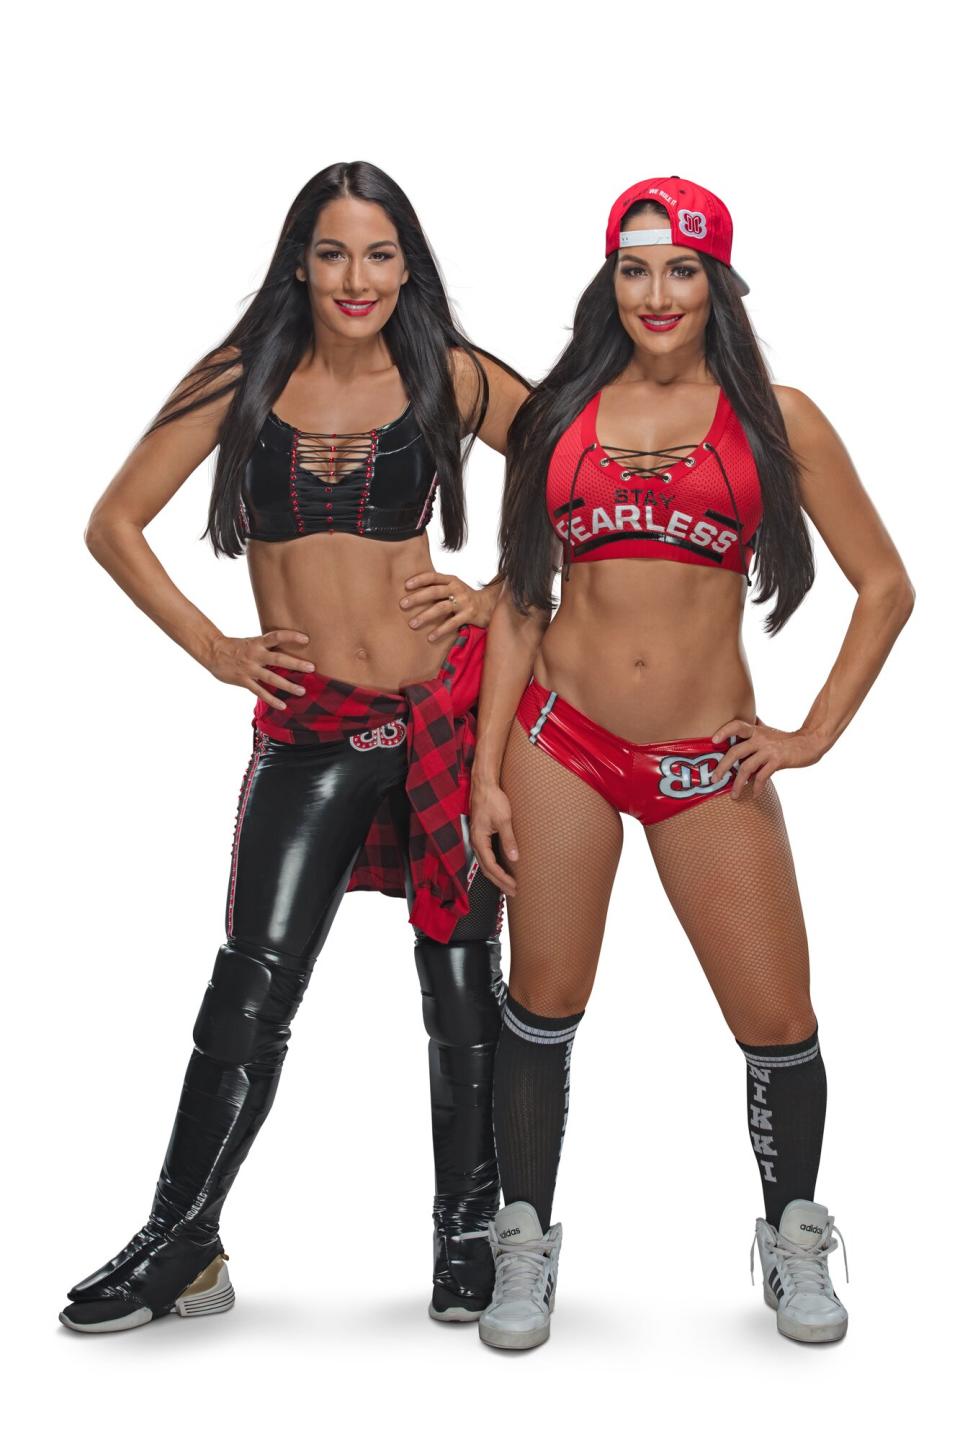 Wwe Brie Bella Porn - Nikki and Brie Bella Want Fans to 'Be Inspired' by Biography: WWE Legends  Episode: 'We're Survivors'